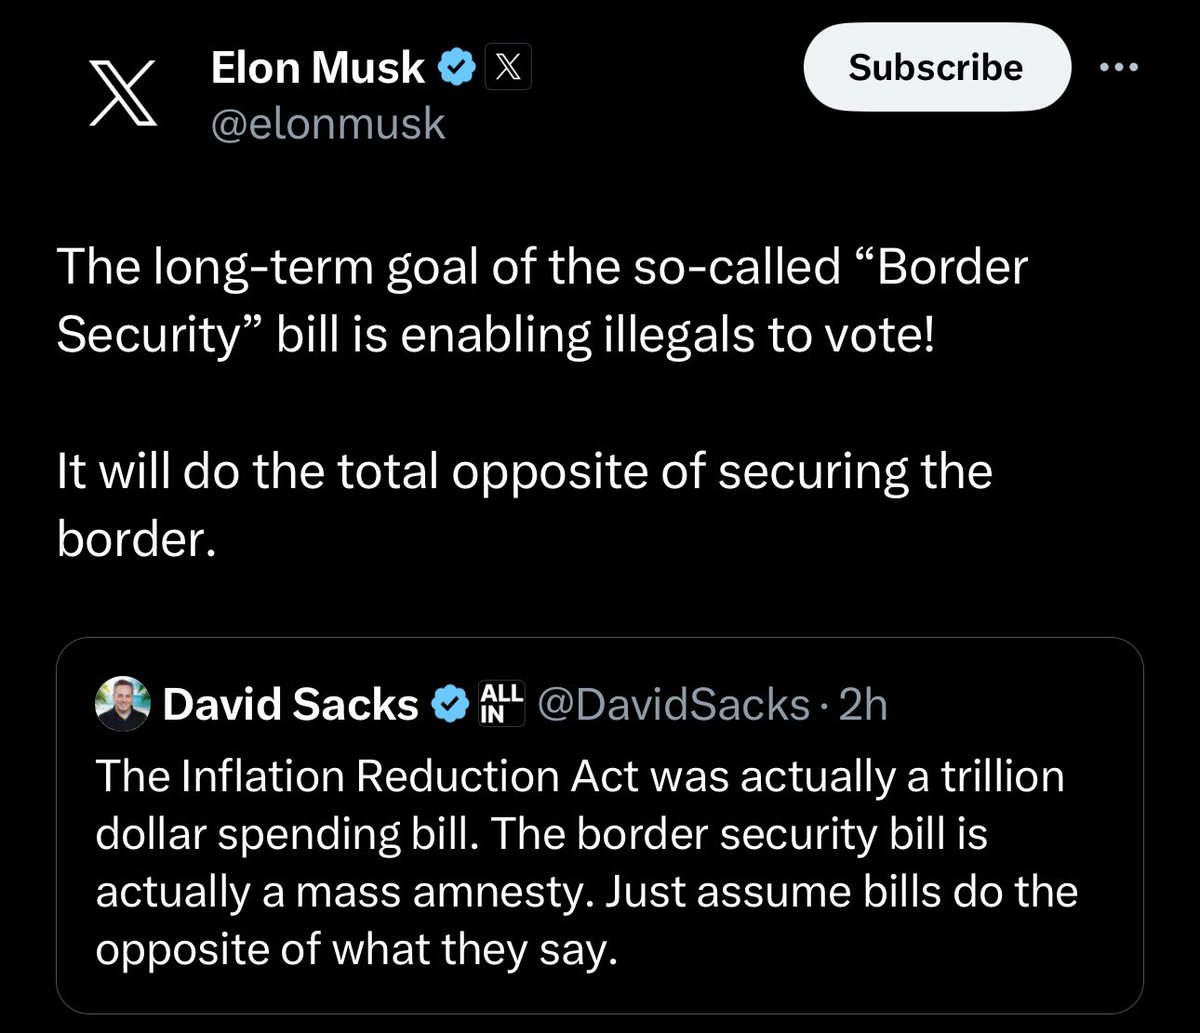 Let’s try this again, Elon. 1. “Illegals” are not able to vote in any federal or state election. They can currently vote in 17 municipalities nationwide. 2. The process to become a citizen still takes a long time, it won’t help Biden in 2024. 3. You’re assuming every new…